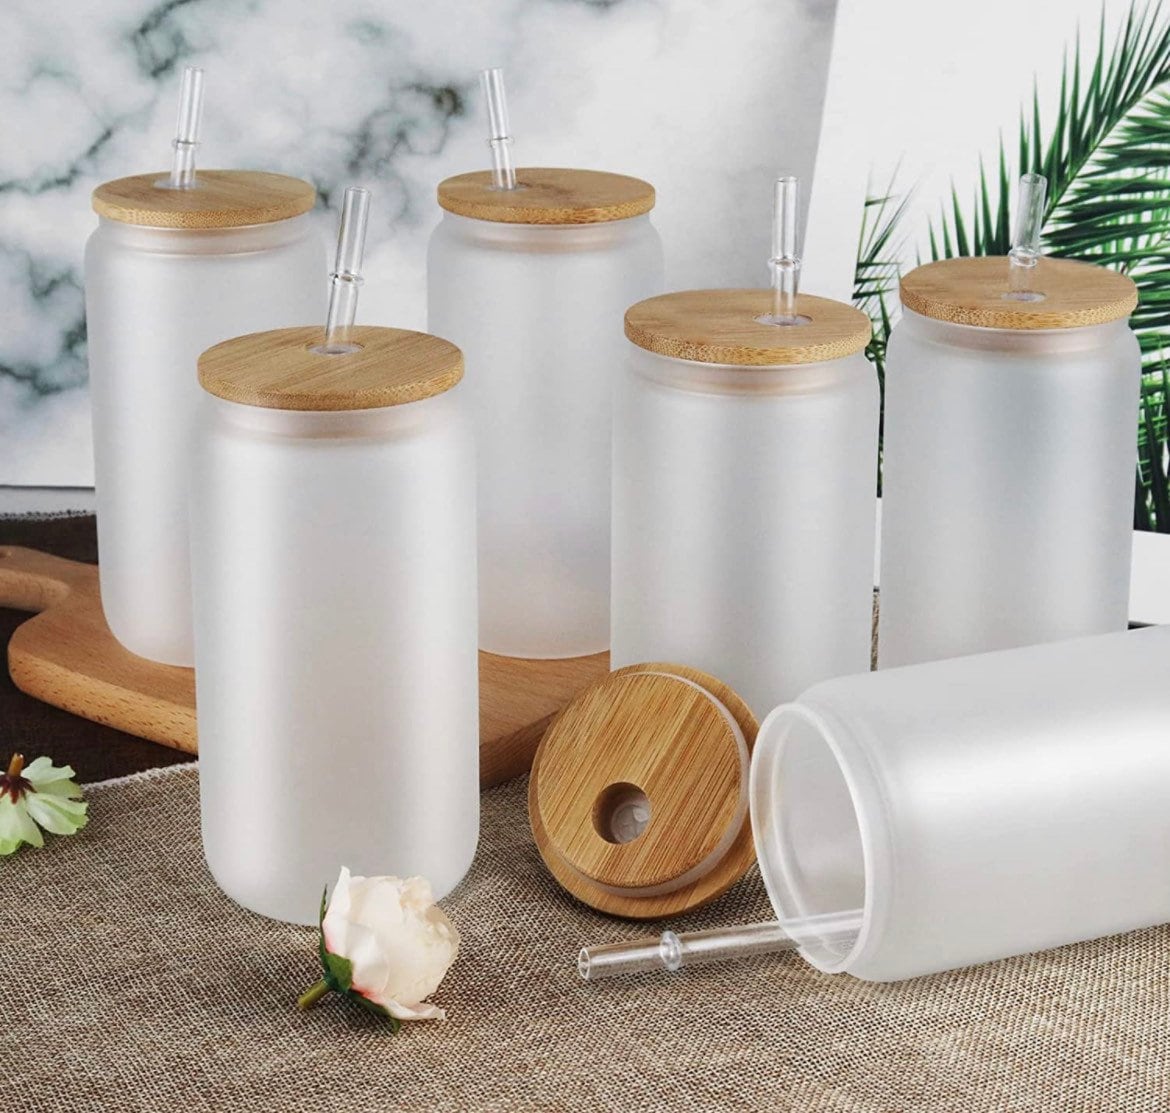 16oz Glass Jars With Straws With Lids And Straws Sublimation Blanks For  Iced Coffee, Beer, And More US CA Stock From Bazaarlife, $3.1